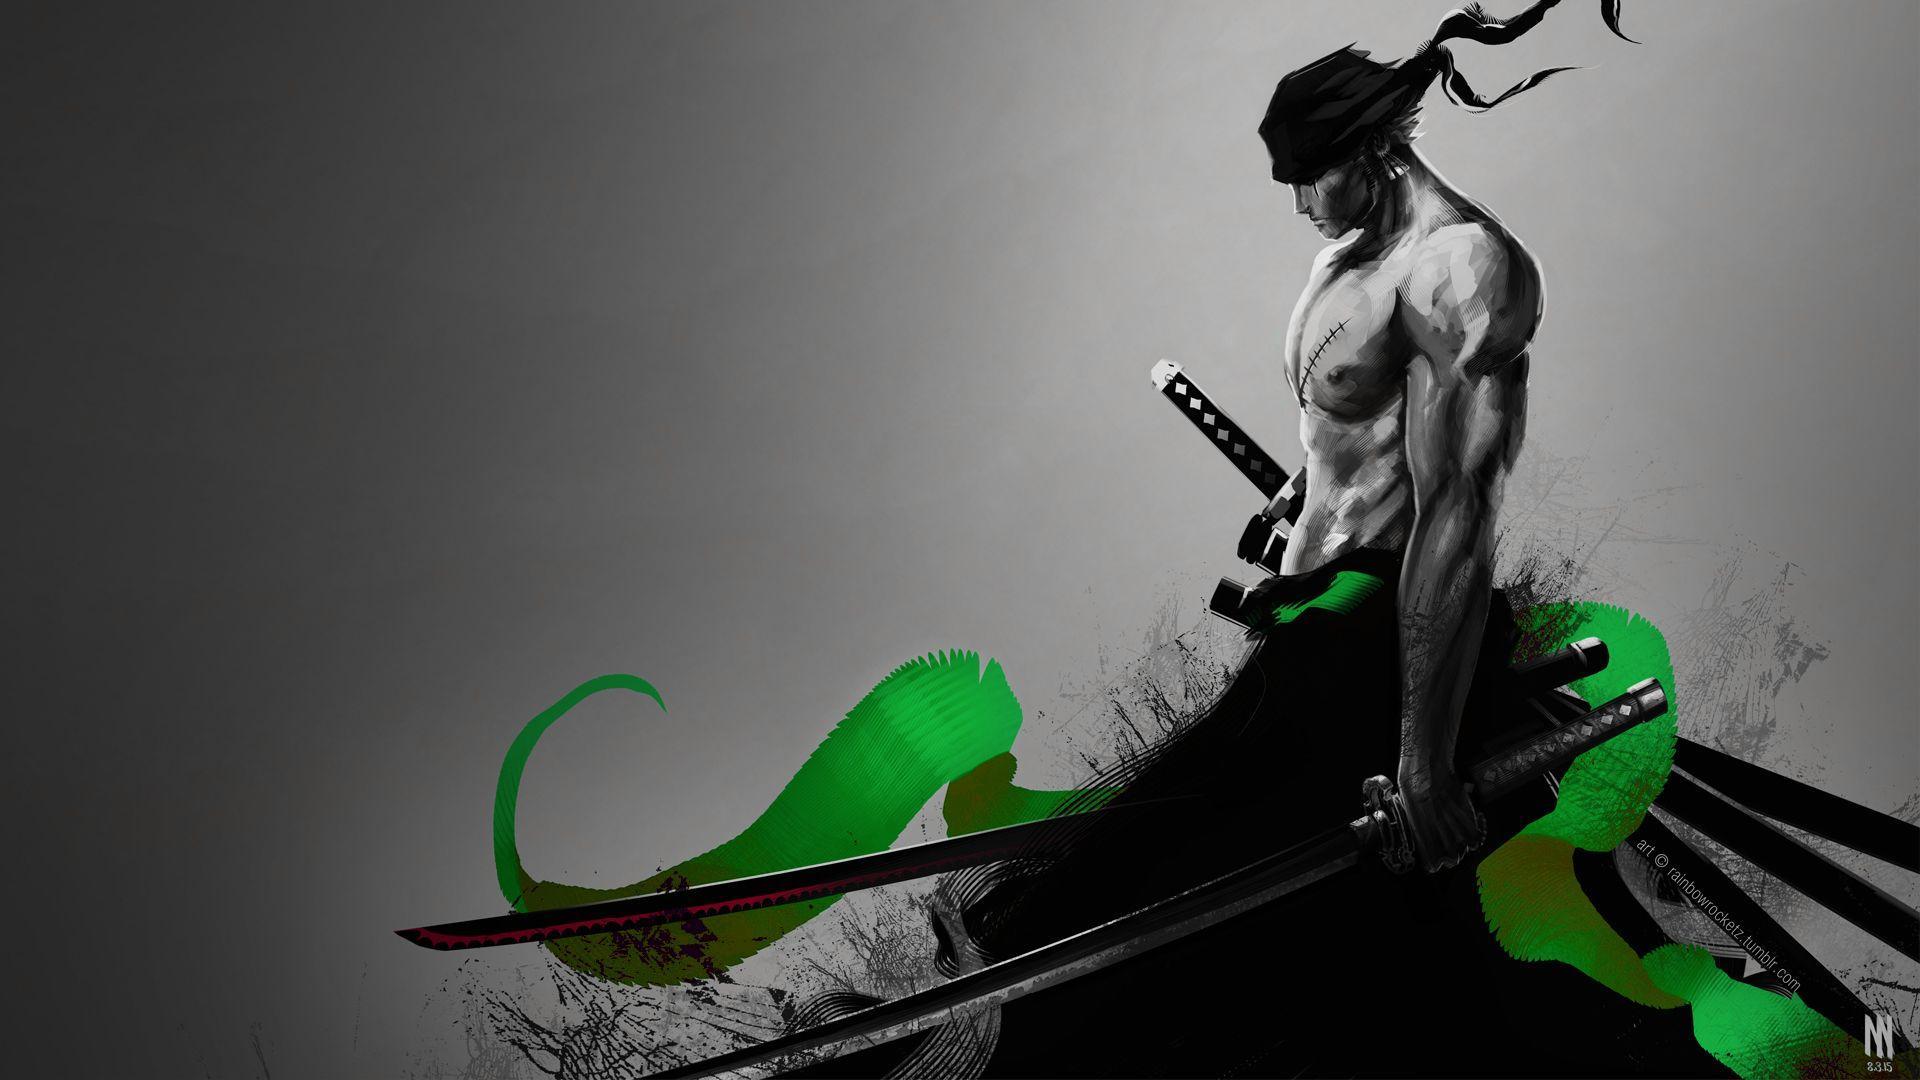 Zoro painting (wallpaper + high resolution picture) :)